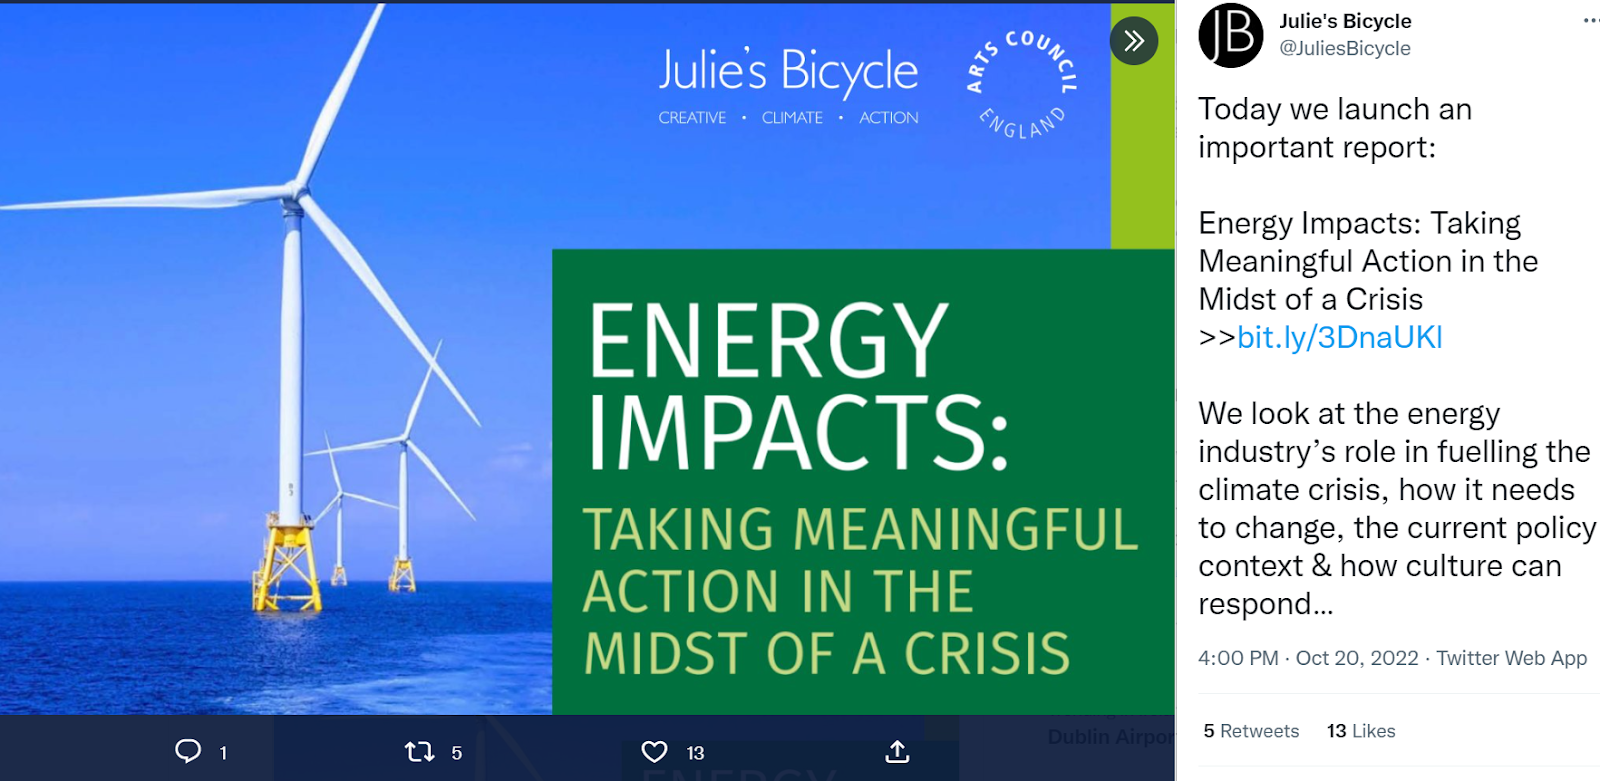 Energy Impacts: Taking Meaningful Action in the Midst of a Crisis